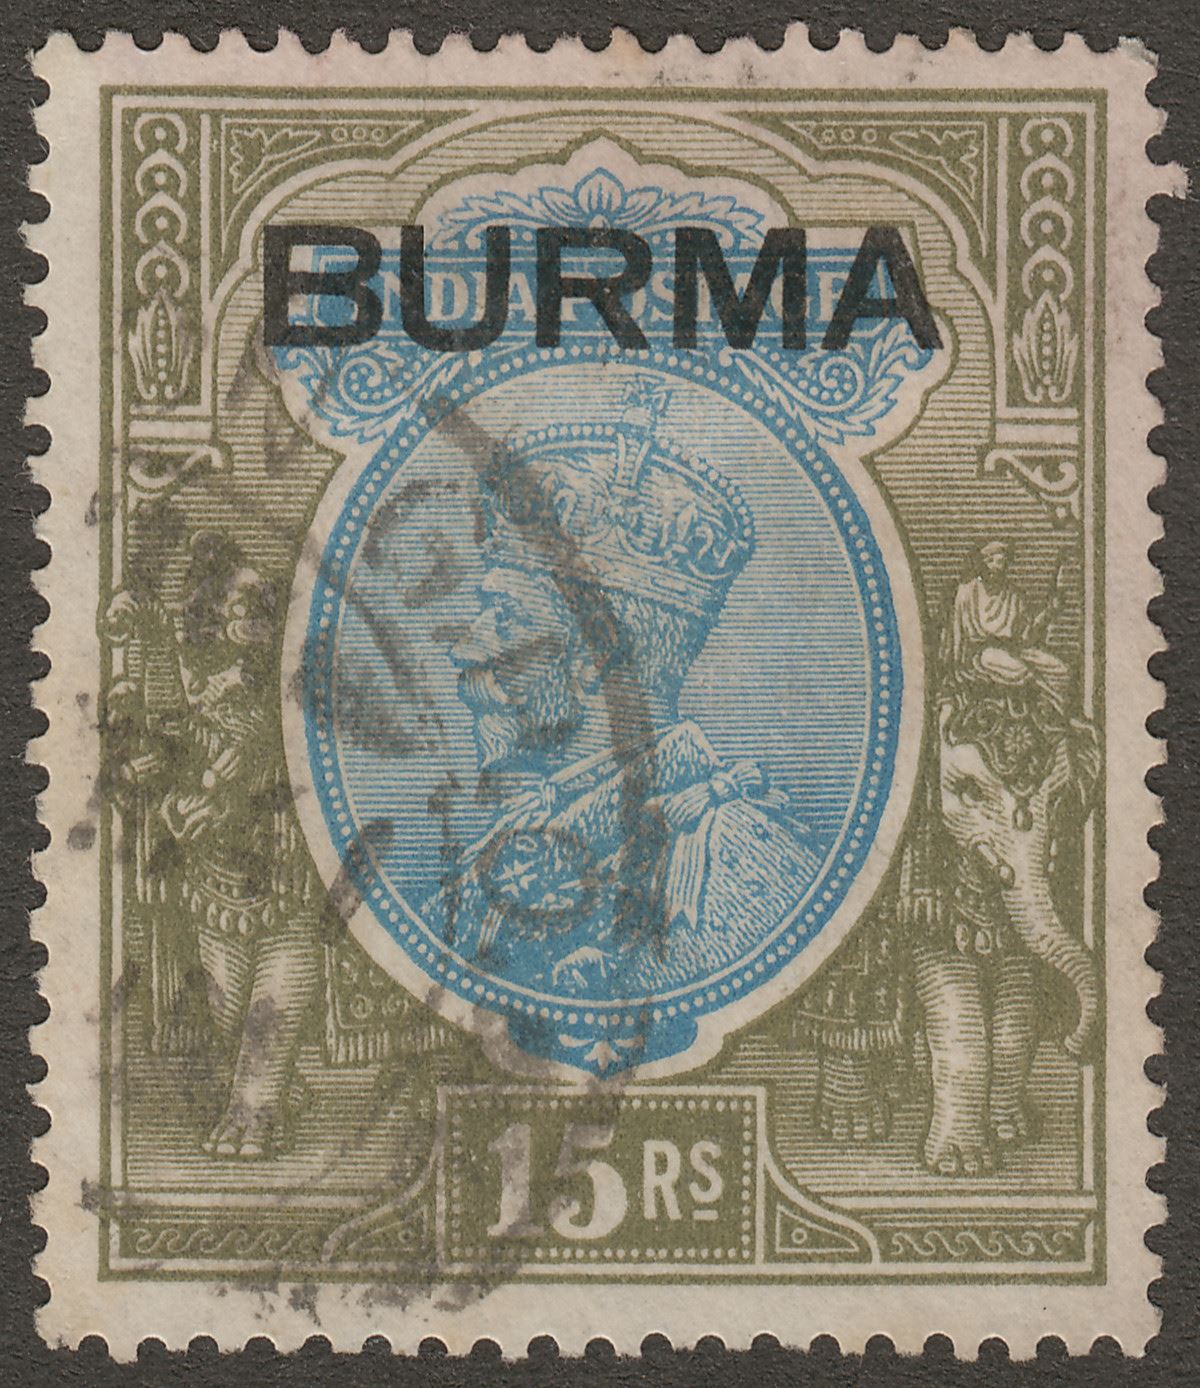 Burma 1937 KGV Overprint on India 15r Blue and Olive Used SG17 cat £275